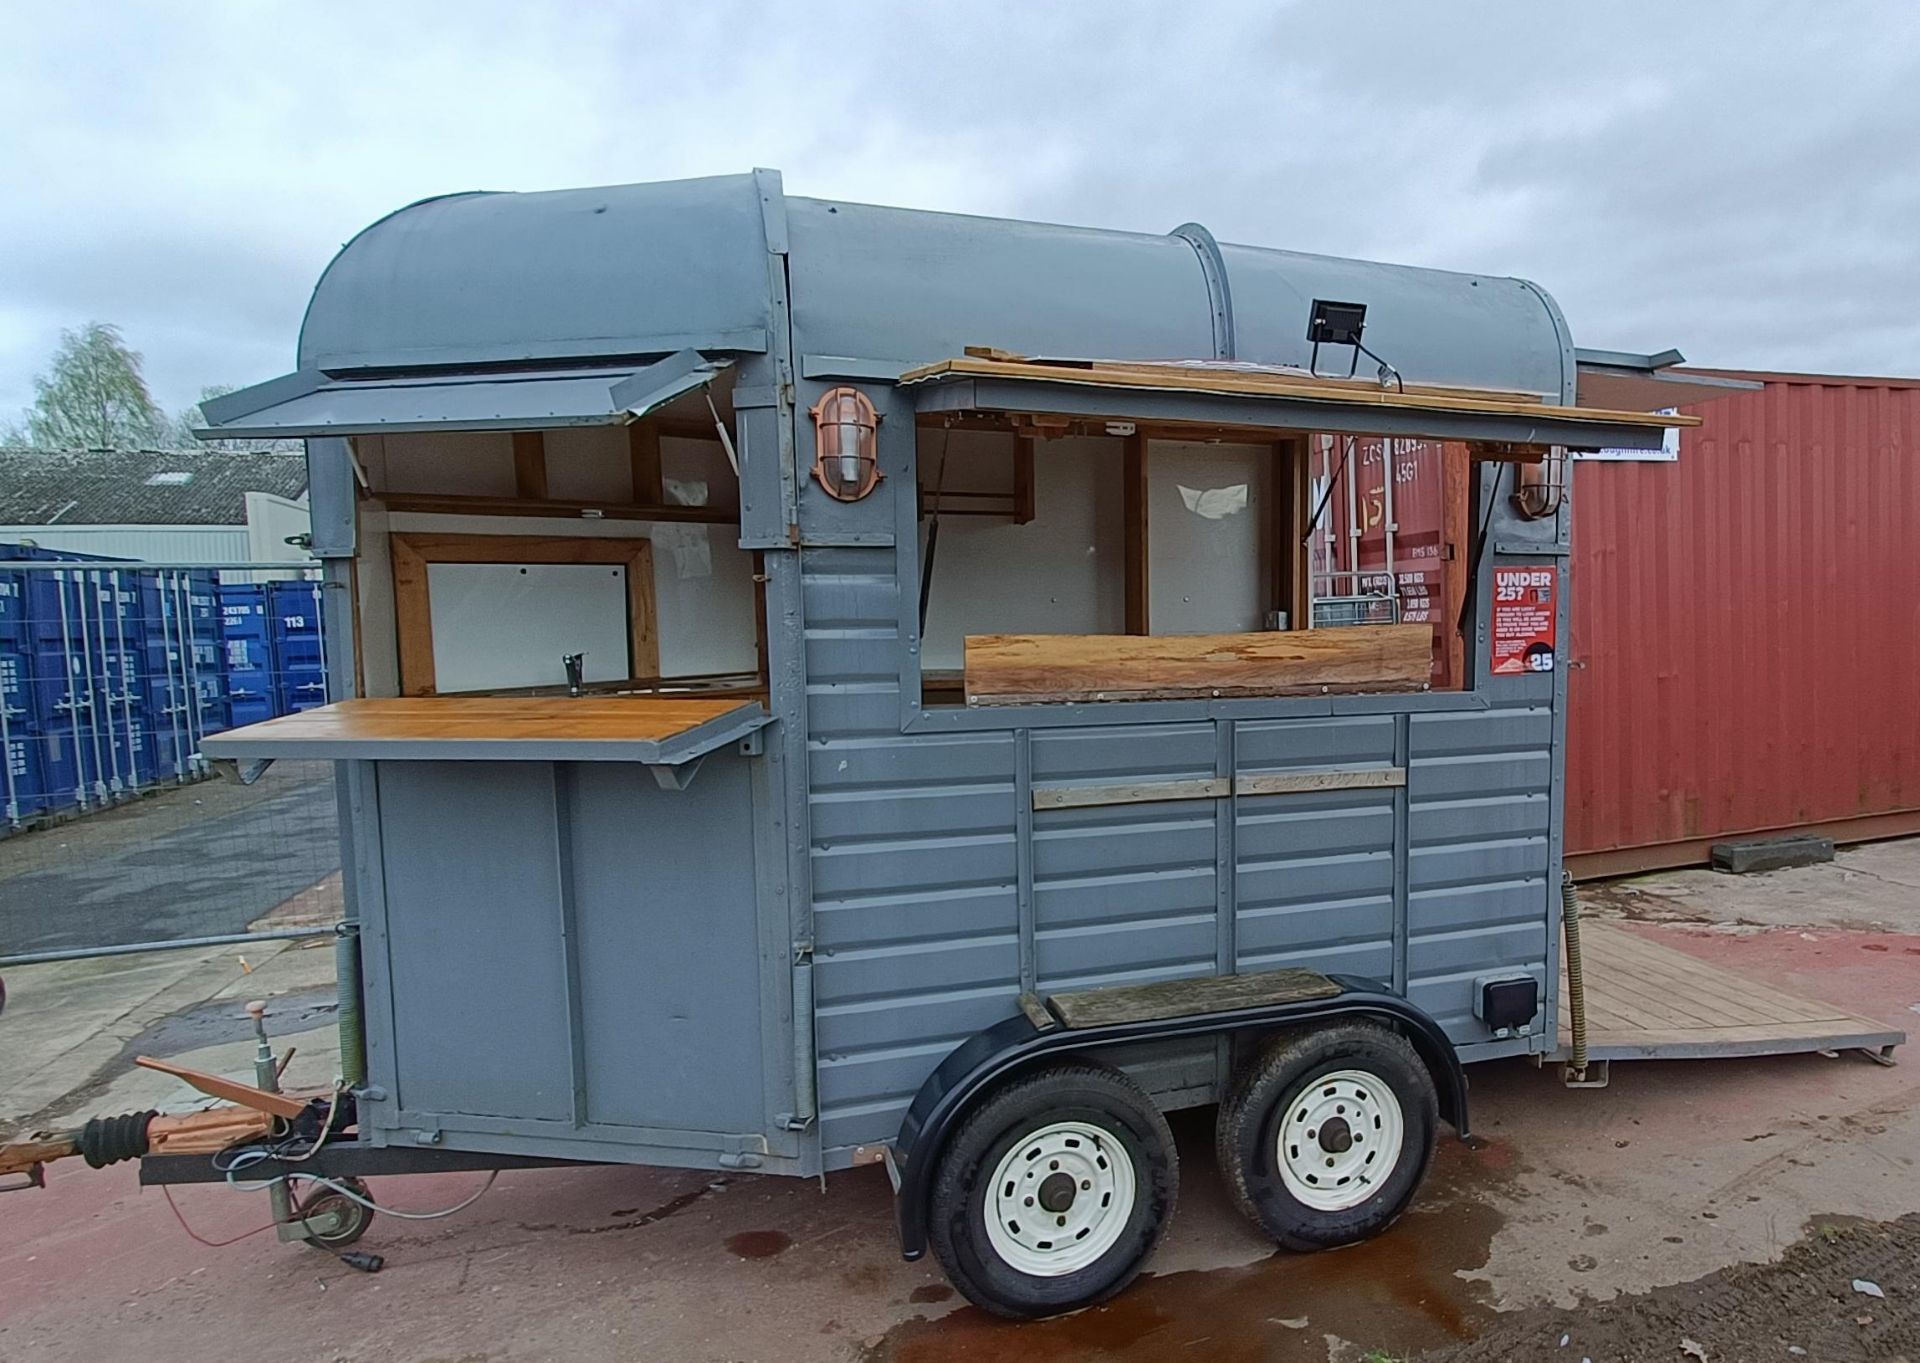 Converted horsebox twin axle catering unit / mobile bar concession unit